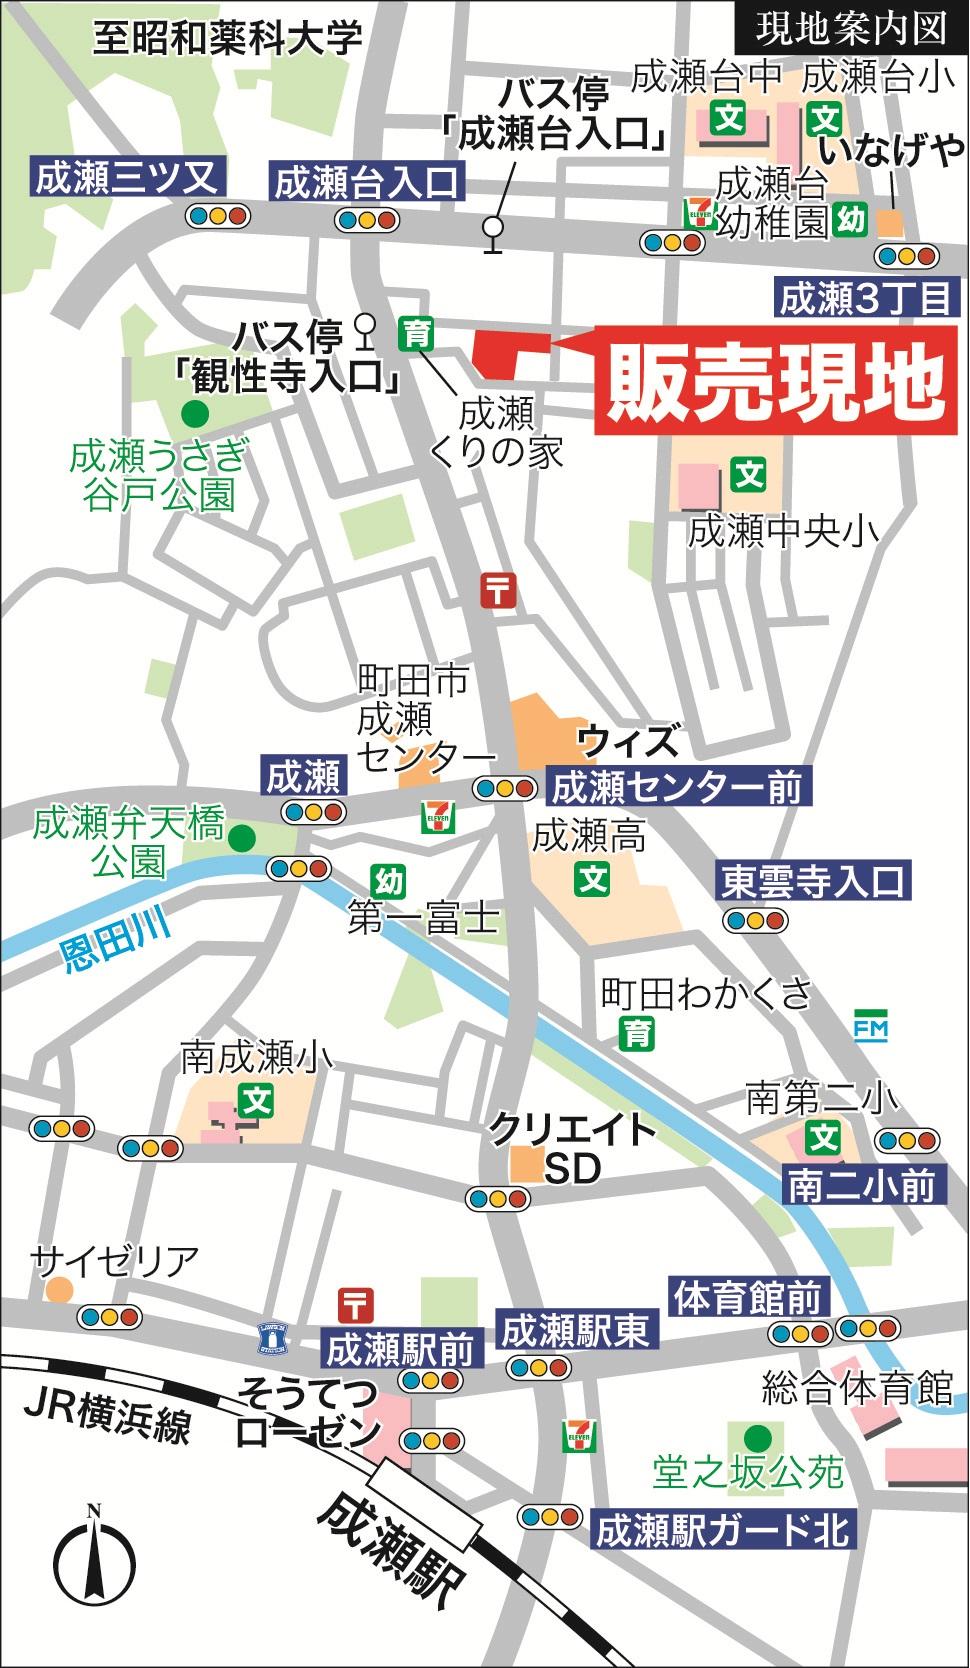 Local guide map. Ahead is the local that around the nursery. Super and educational facilities nearby, The surroundings are quiet residential area.